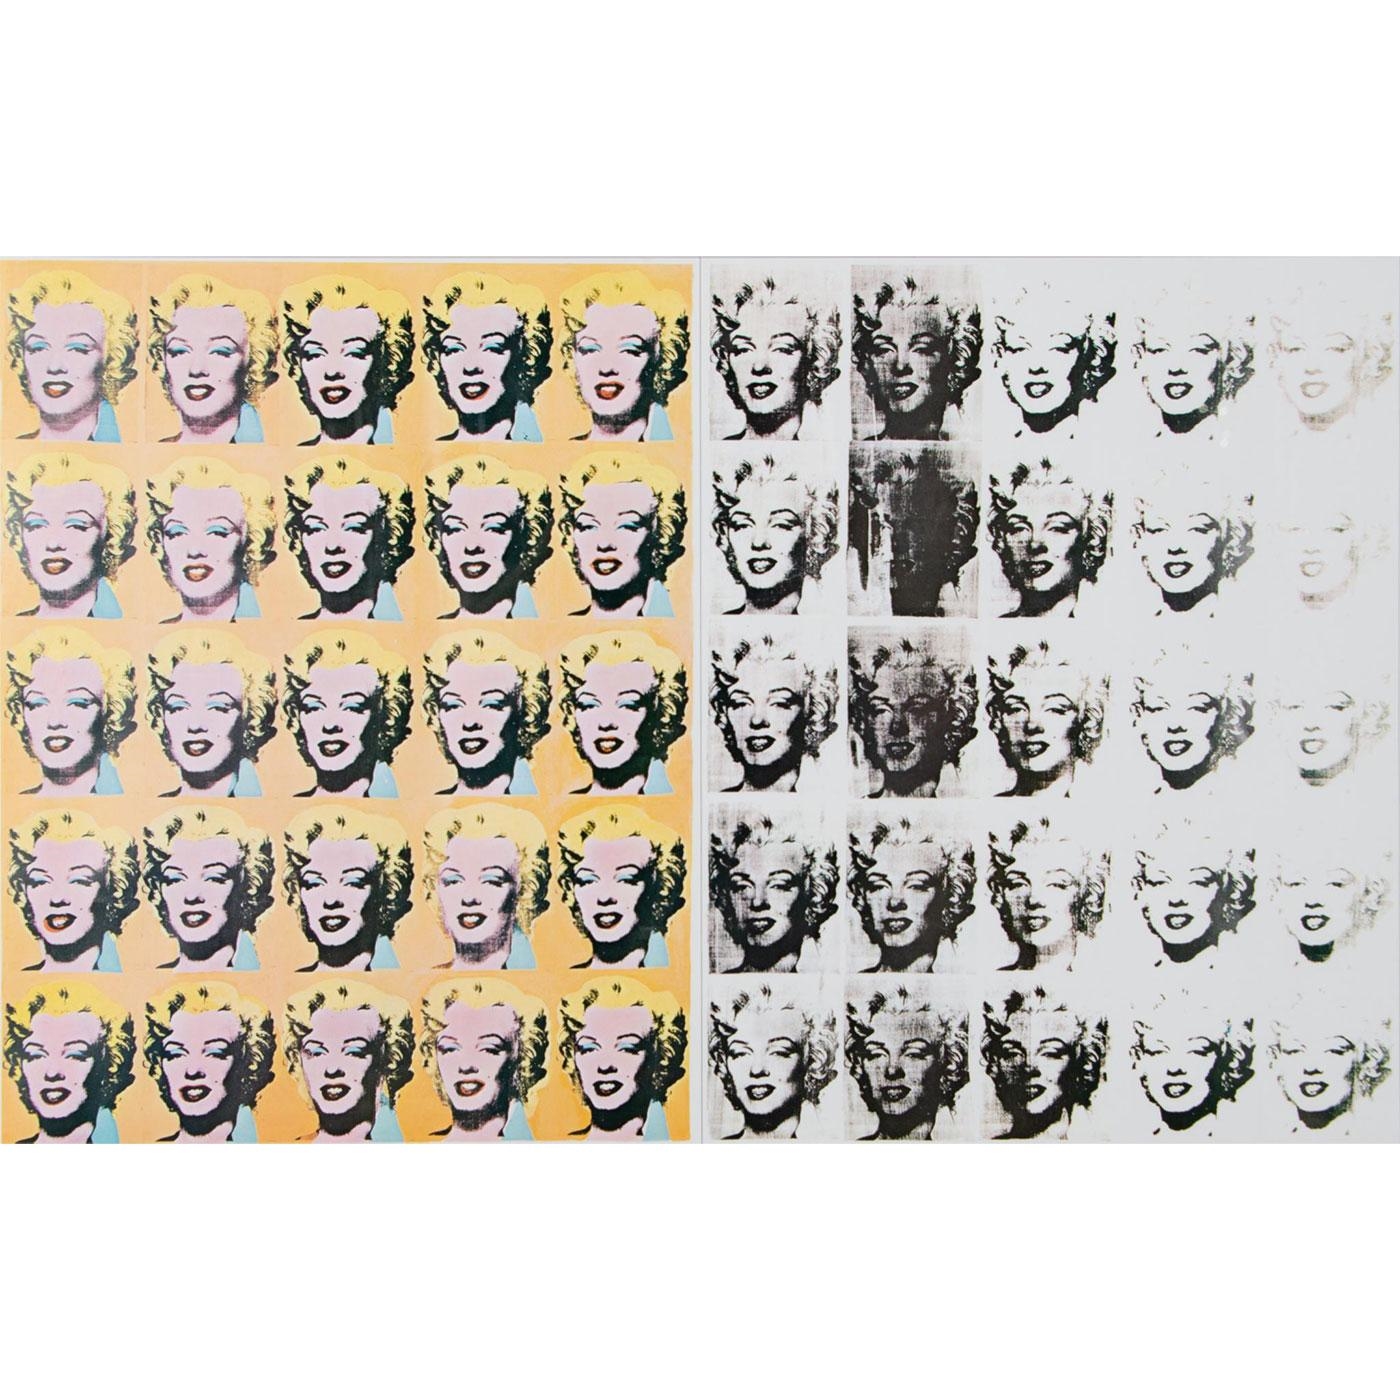 Marilyn Diptych by Andy Warhol, 20th c.